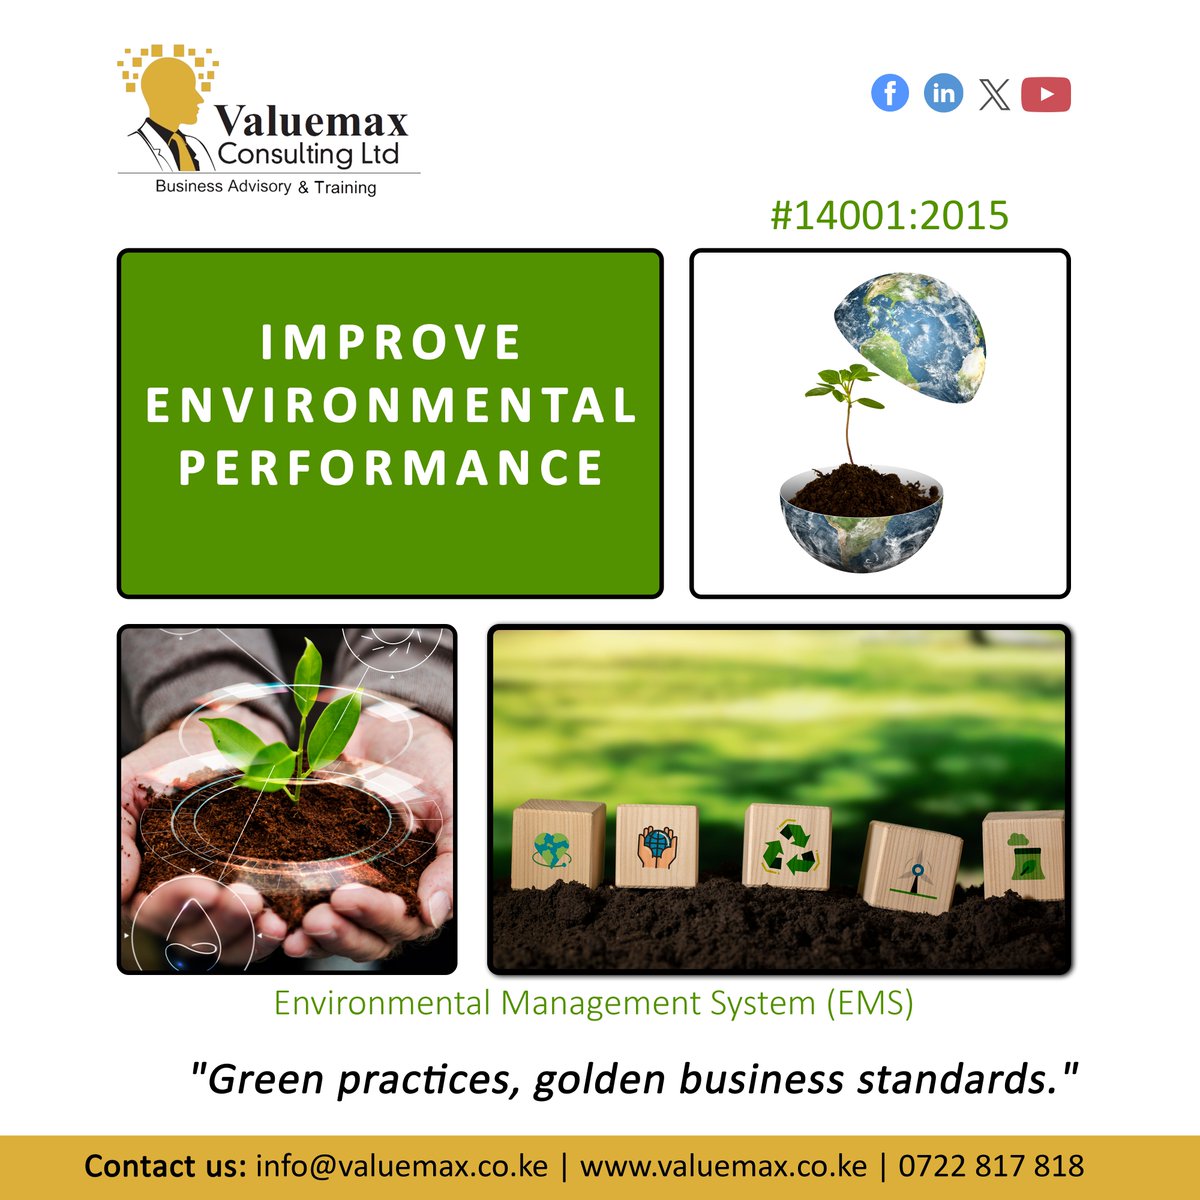 Companies seeking to manage their environmental impact, reduce their footprint, comply with environmental laws & enhance reputation among stakeholders can adopt an environmental management system.

#Environment #GreenEnergy #ClimateChange #Environment #Valuemax #ISOStandards